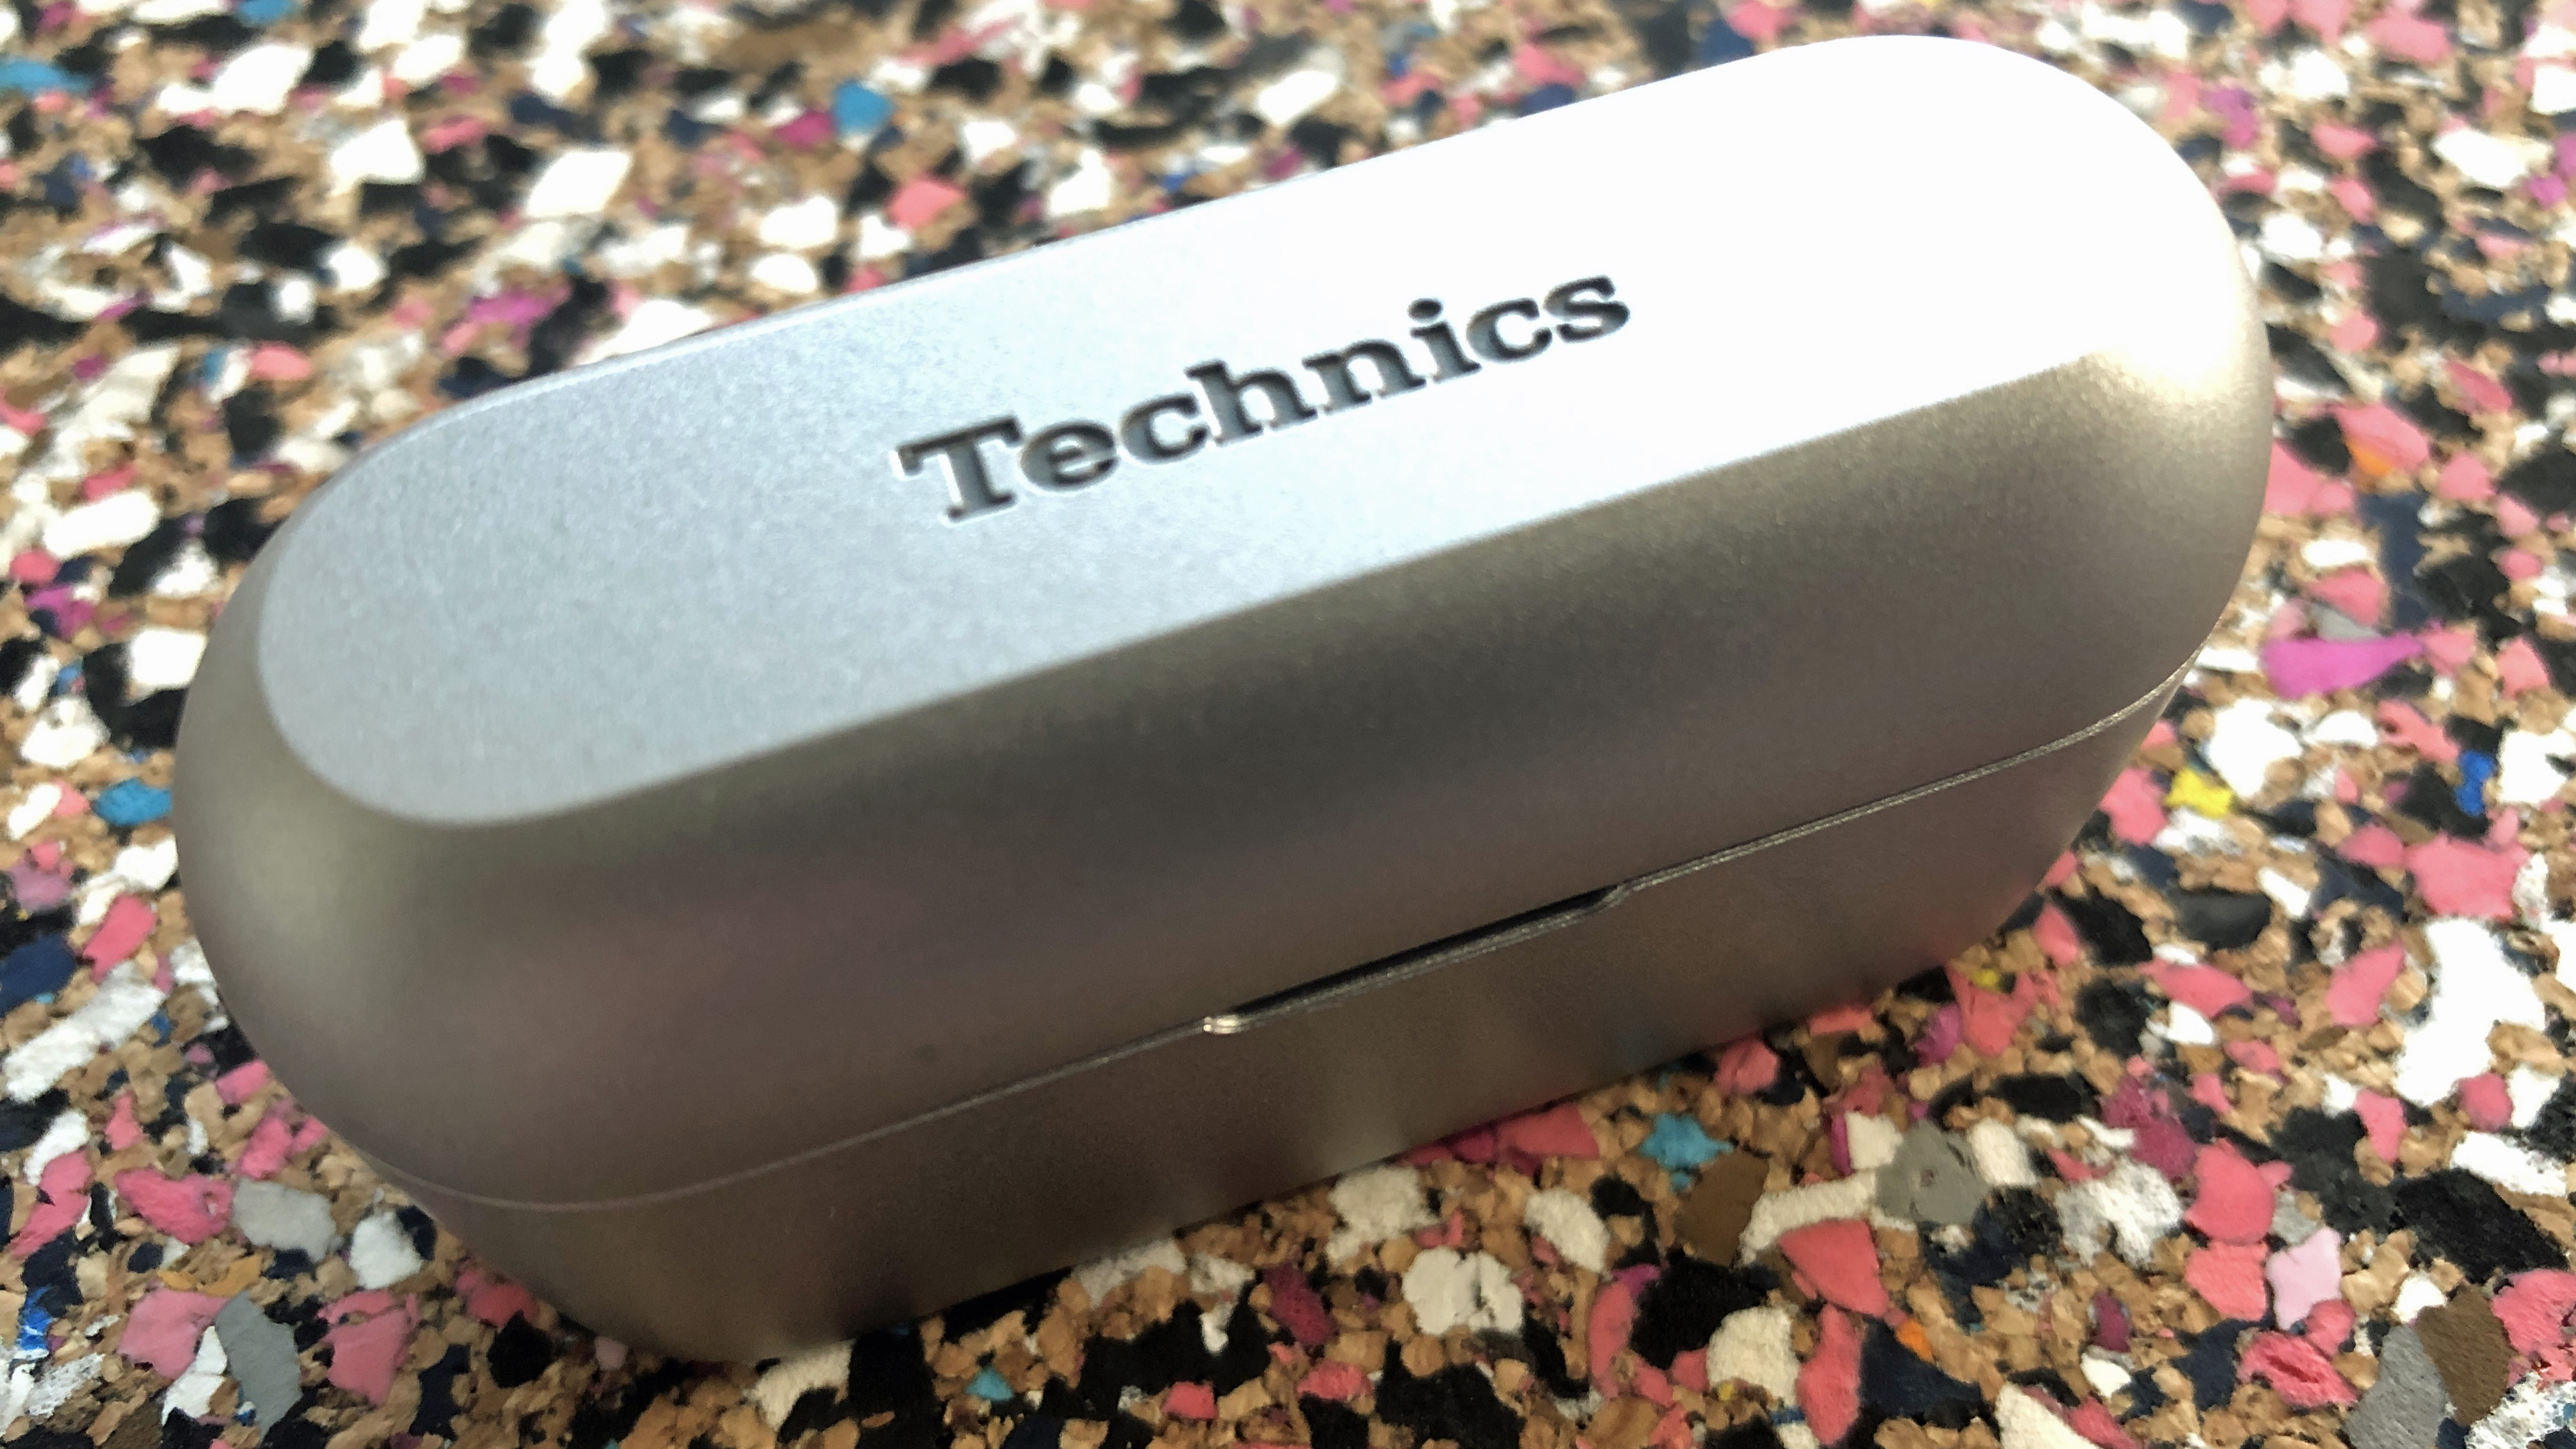 the charging case for the technics eah-az60 true wireless earbuds